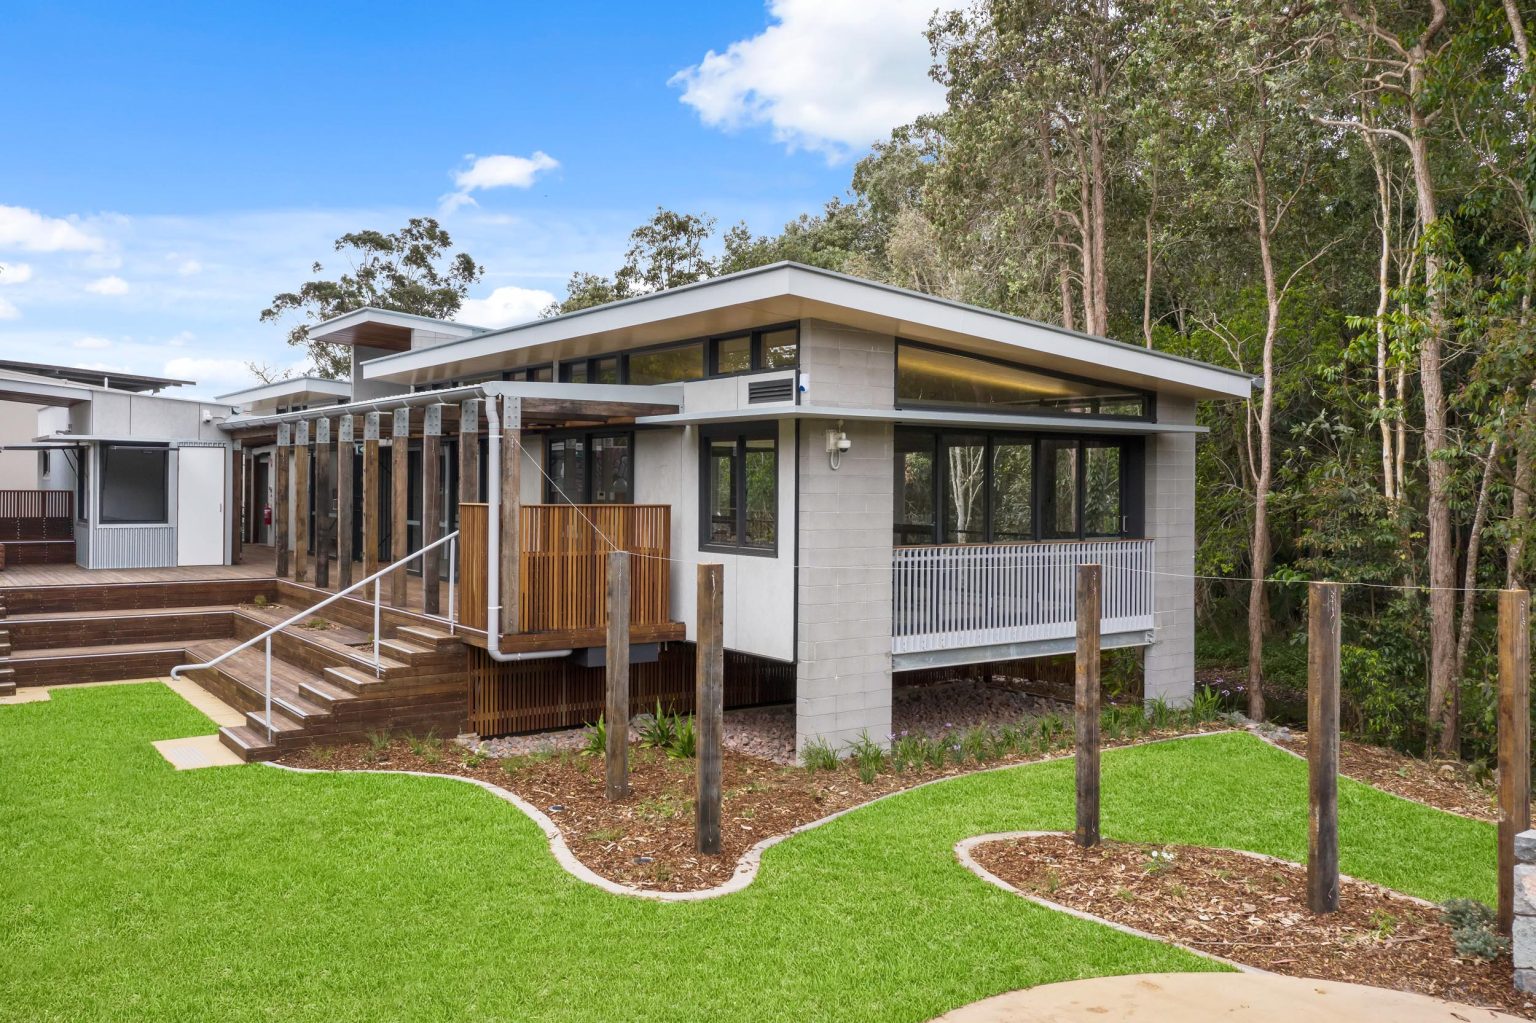 Beerwah Library & Community Centre